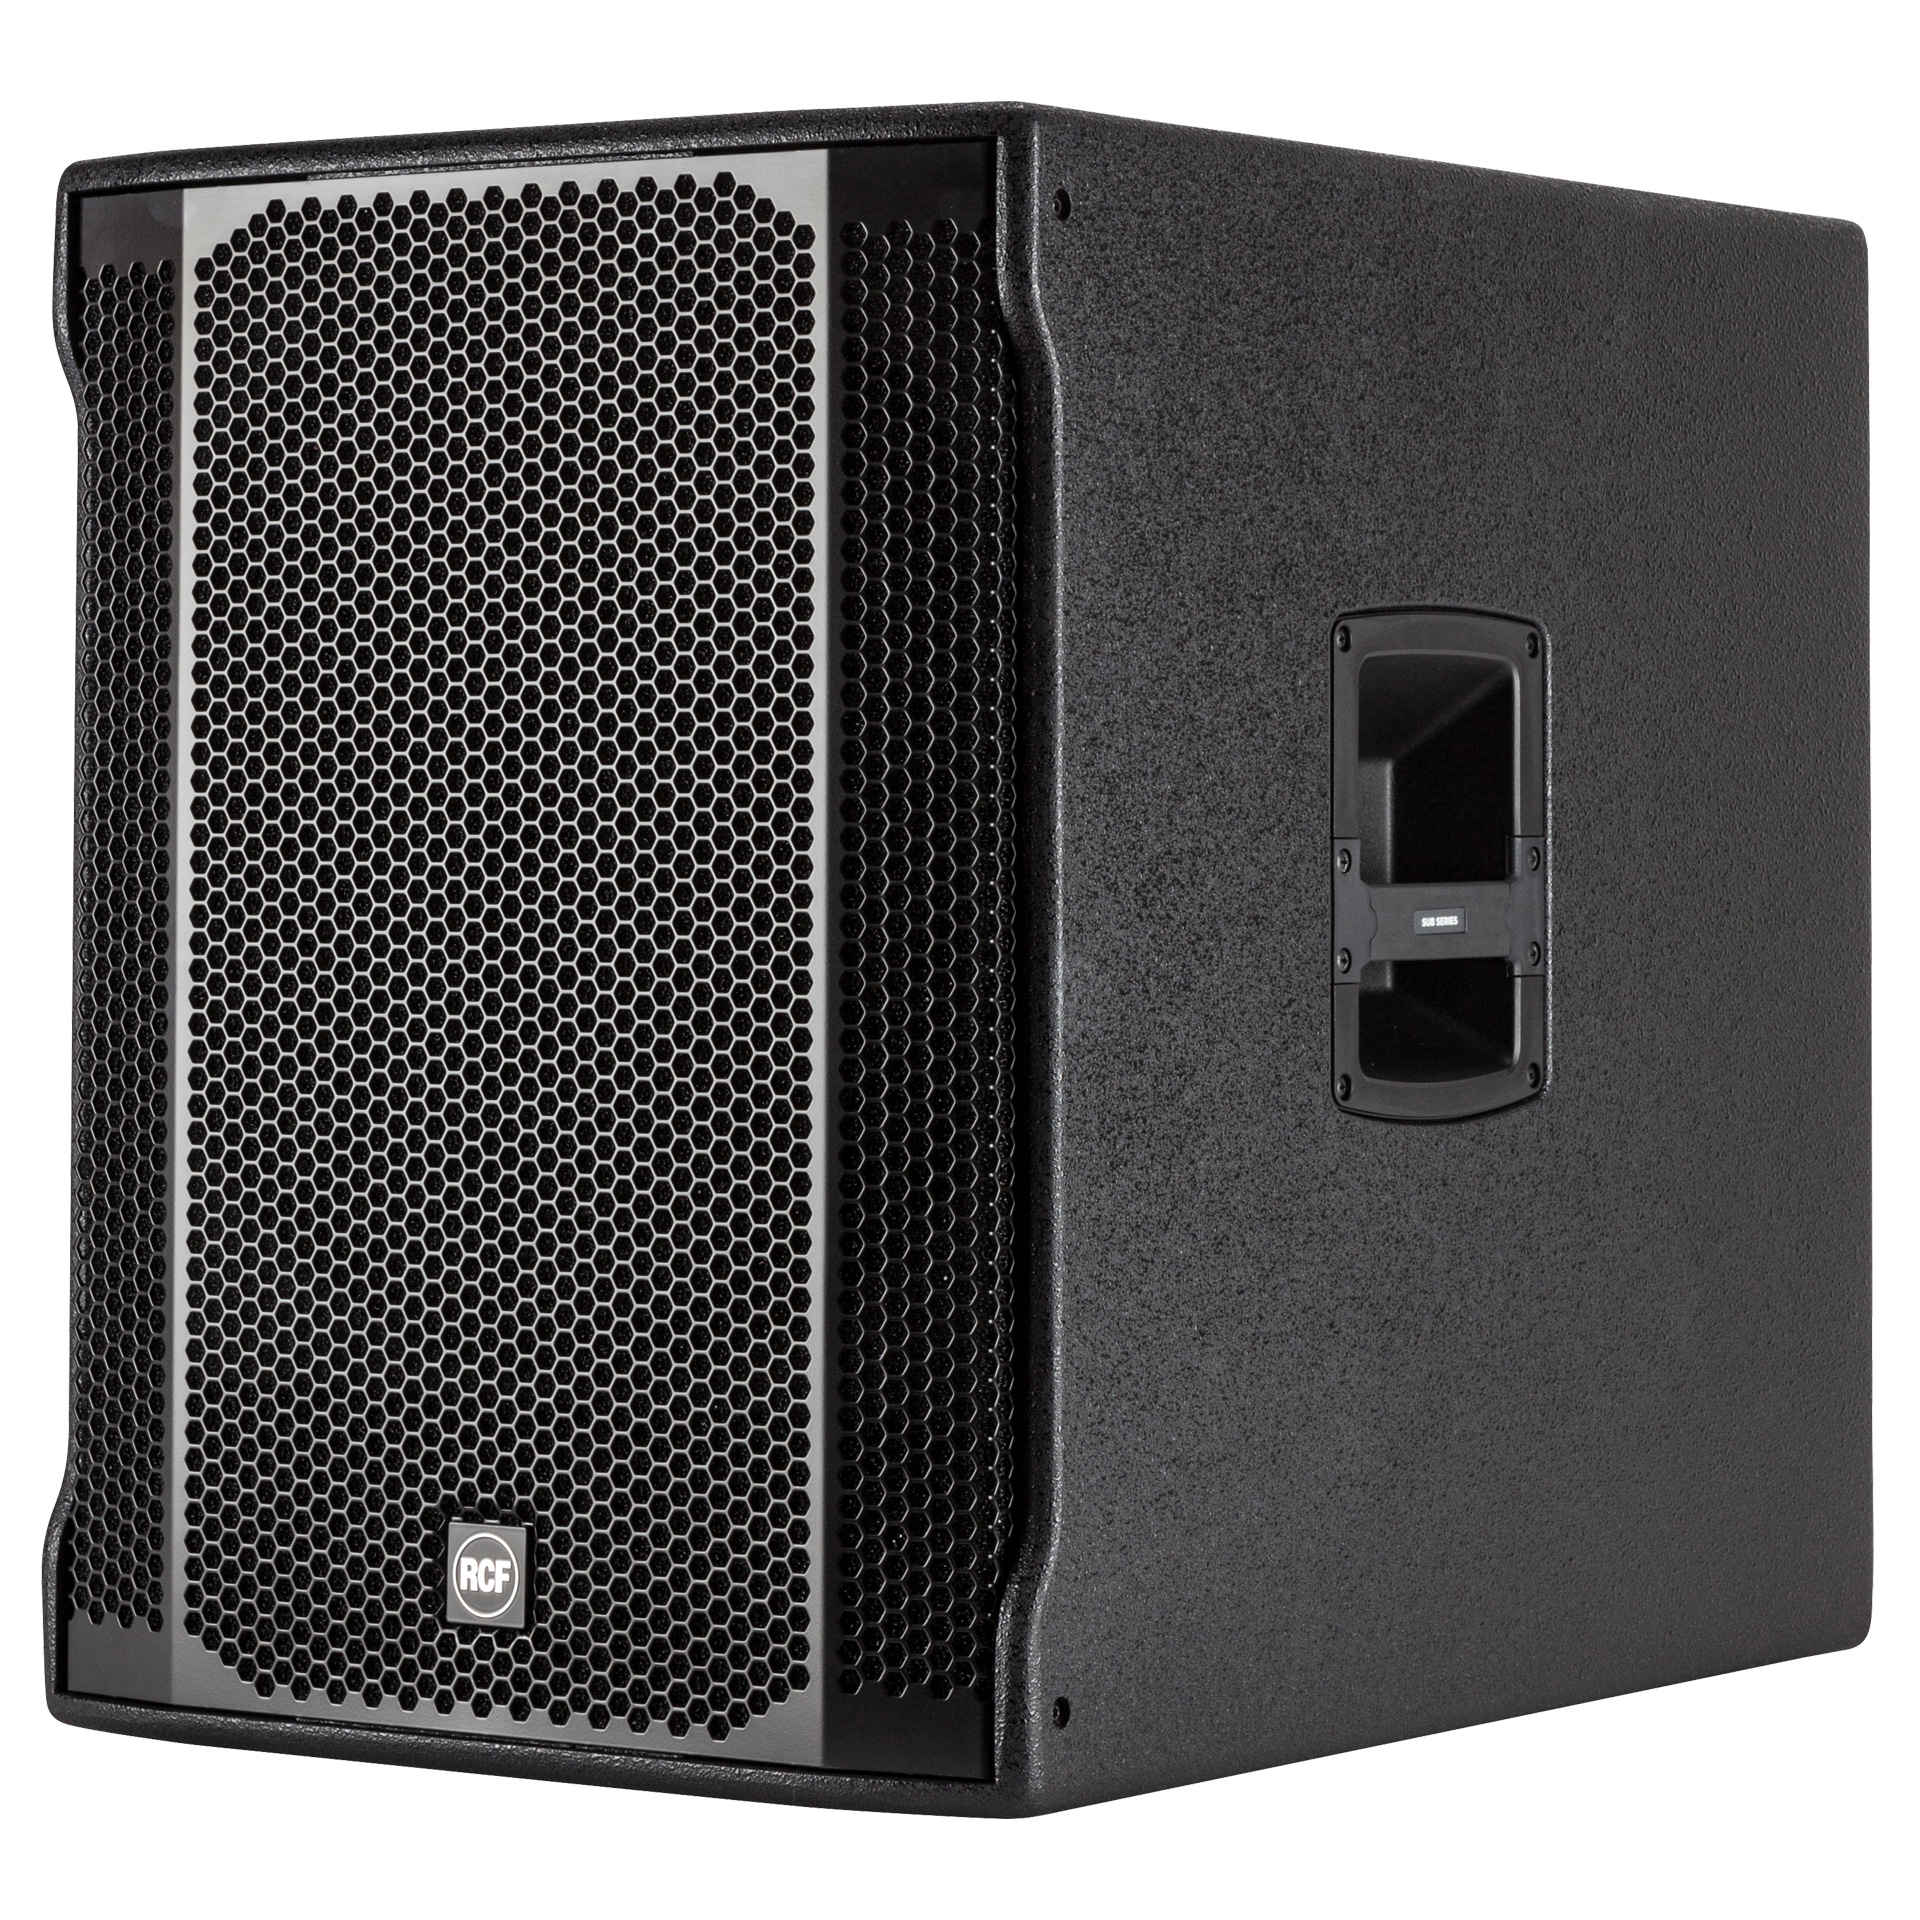 Rcf Sub 708-as Ii - Actieve subwoofer - Variation 1